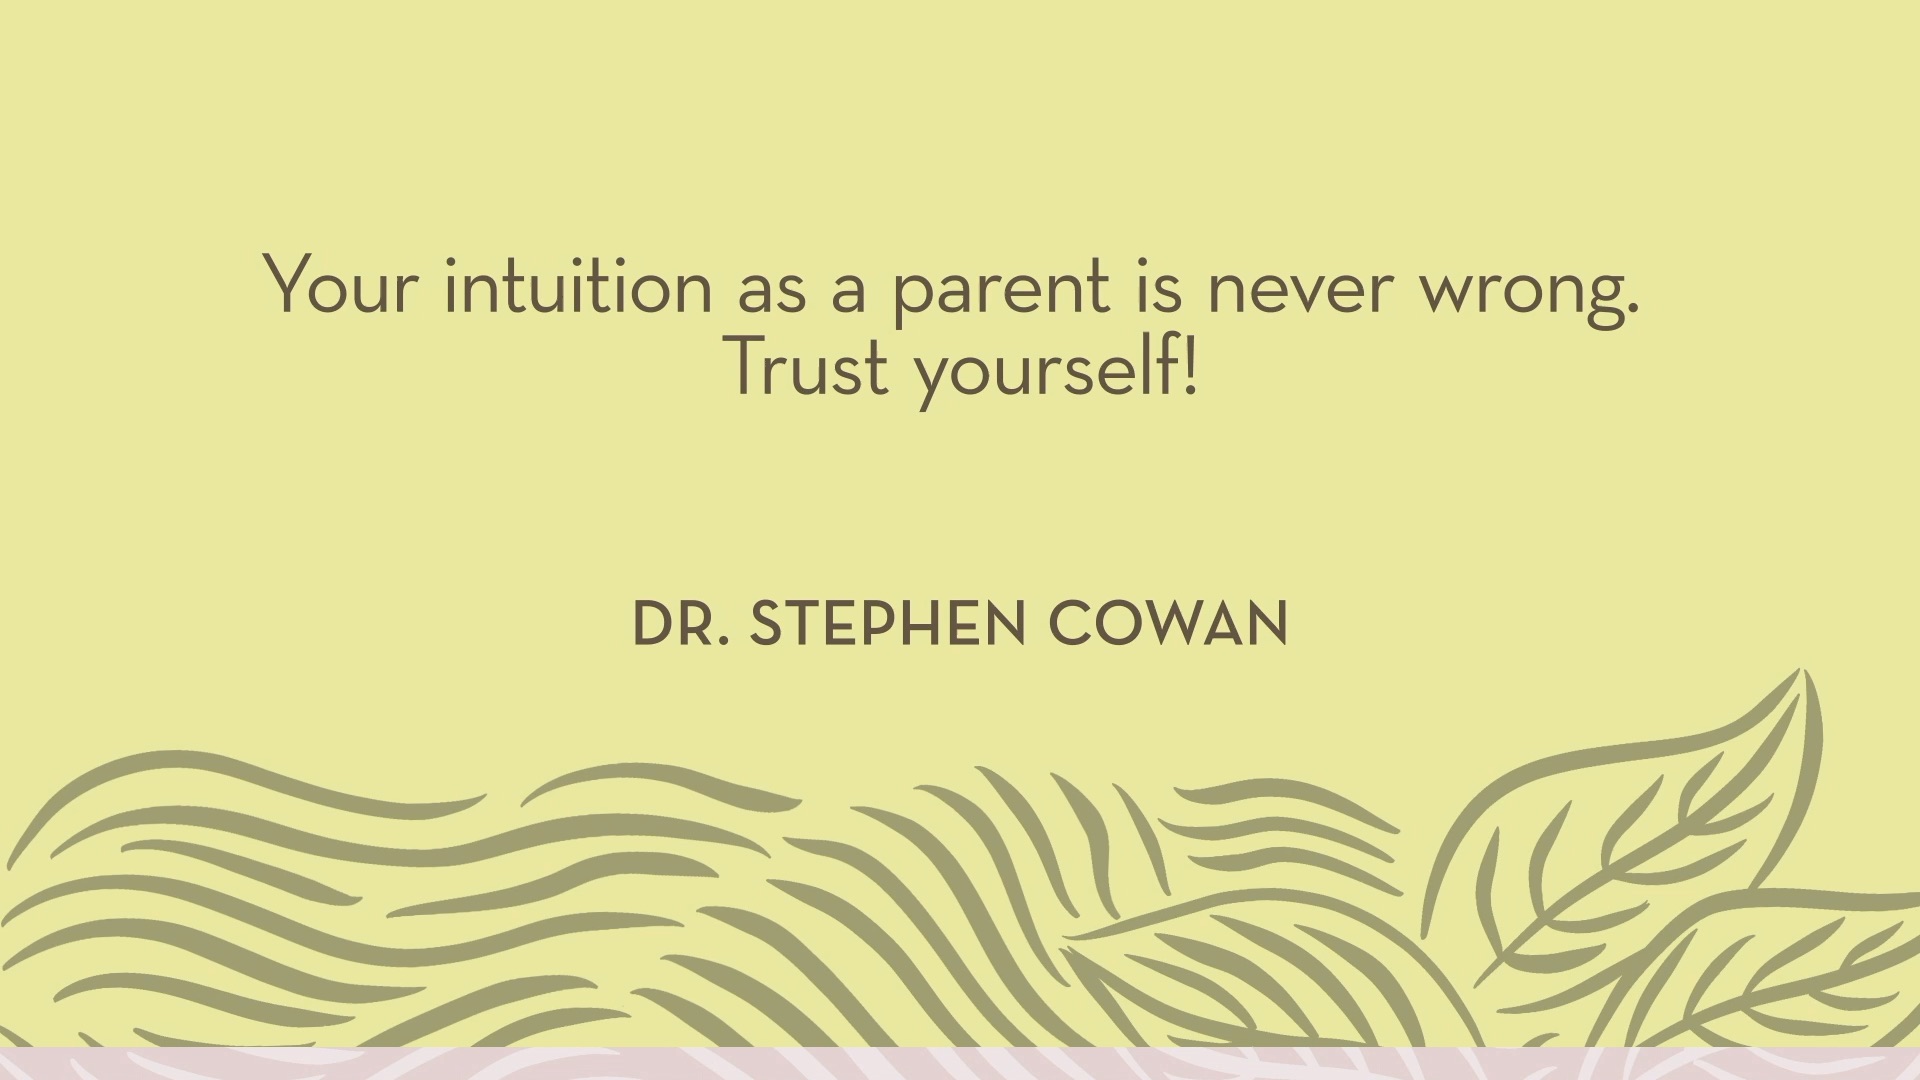 Dr. Cowan | Your intuition as a parent is never wrong. Trust yourself!